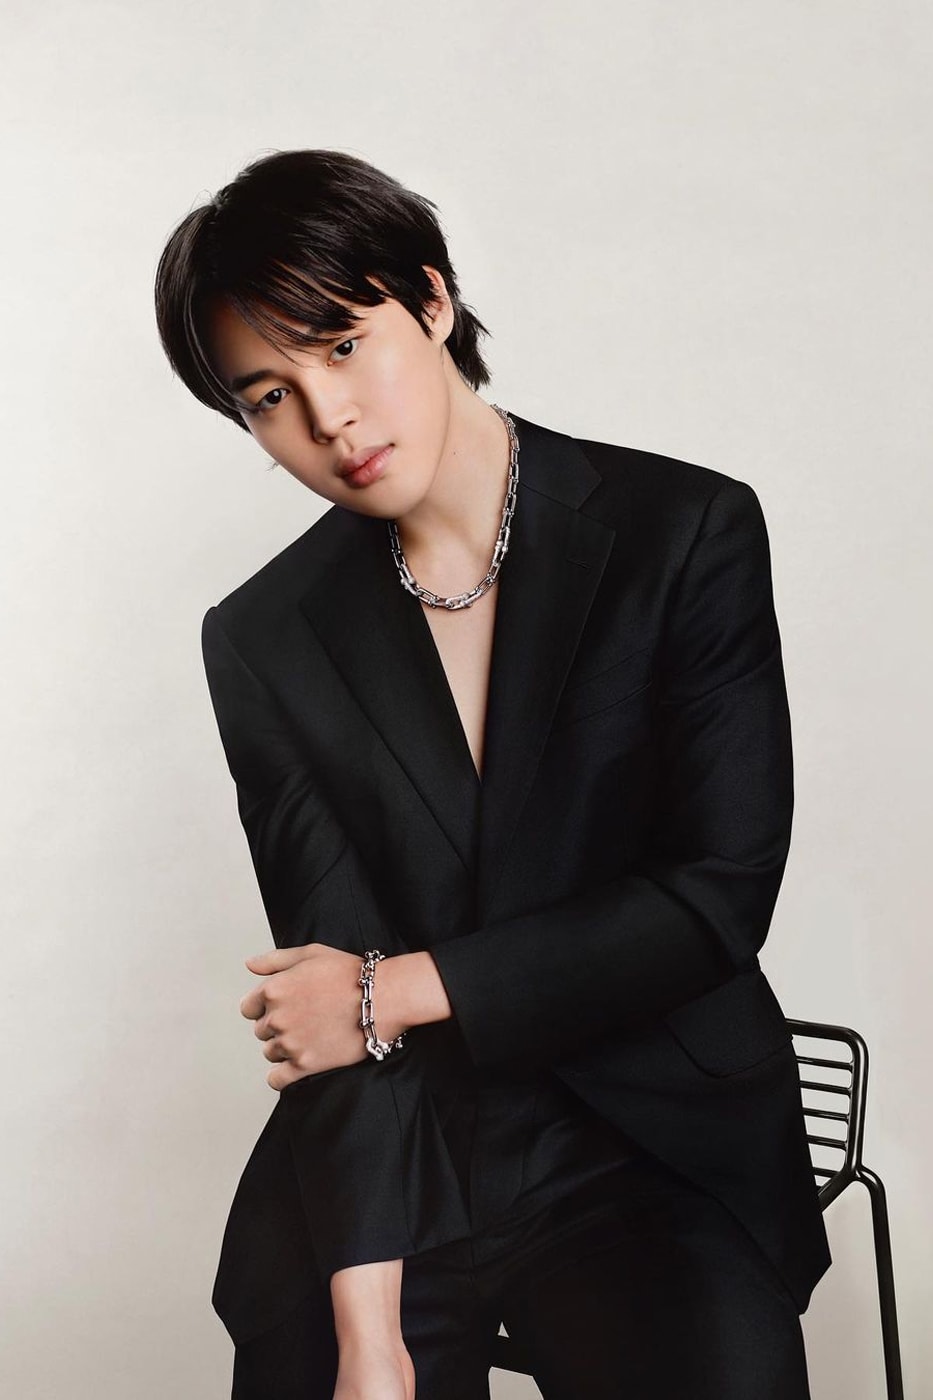 Tiffany & Co. Reveals BTS Jimin's First Campaign